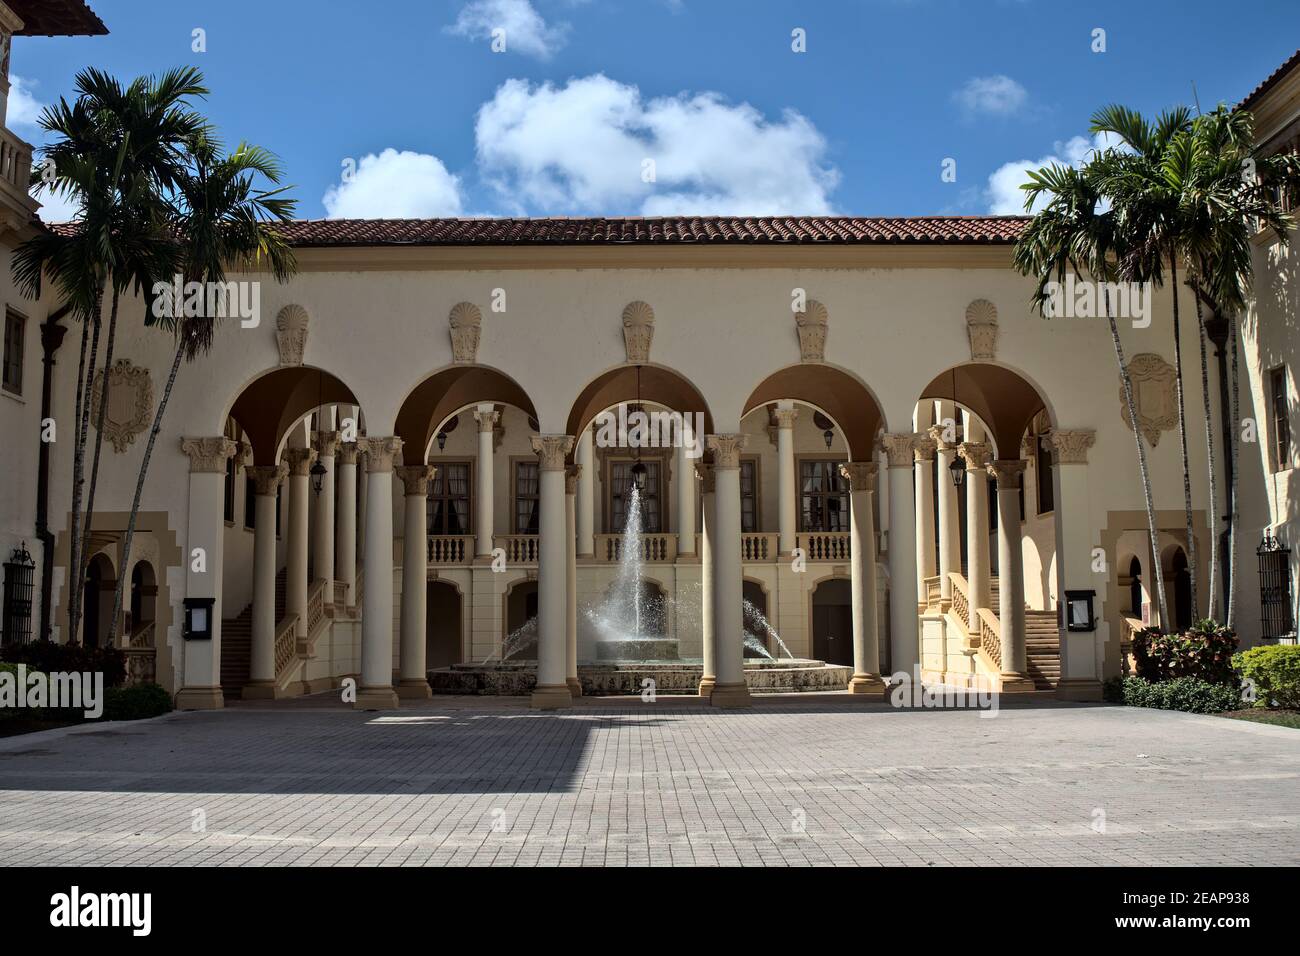 Coral Gables, Florida, USA - 2020: The Miami Biltmore Hotel, a historic luxury hotel built in 1926, designated a National Historic Landmark in 1996. Stock Photo